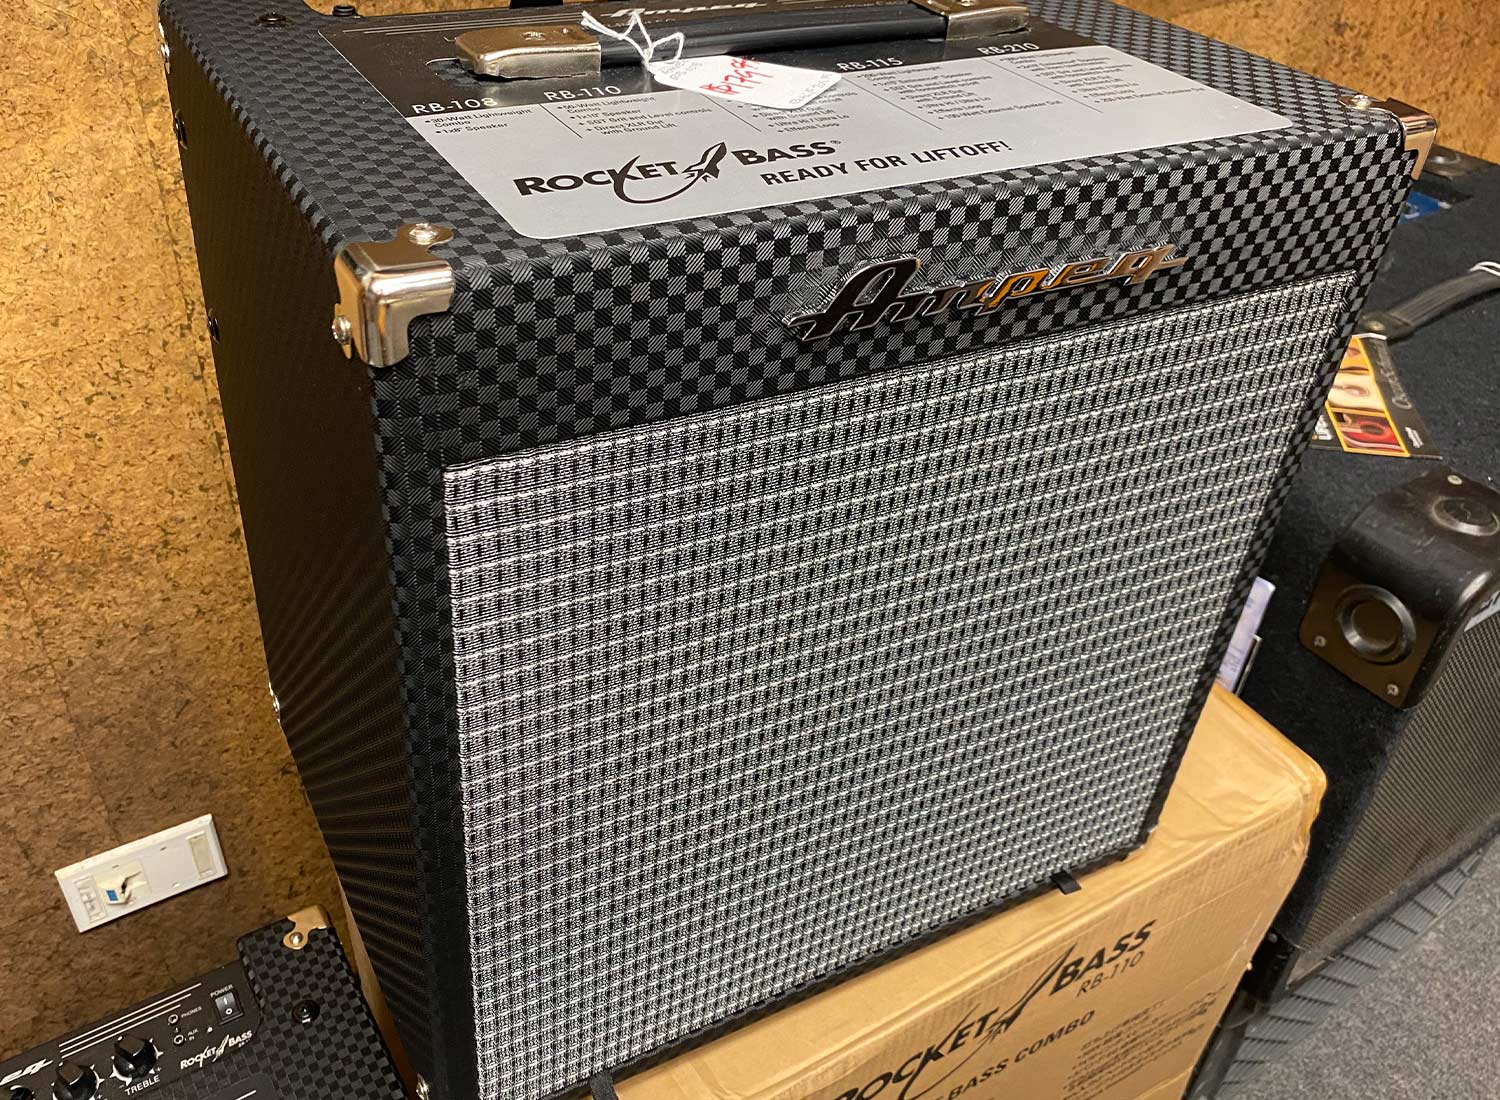 image of guitar amplifier for sale from WestSide Music